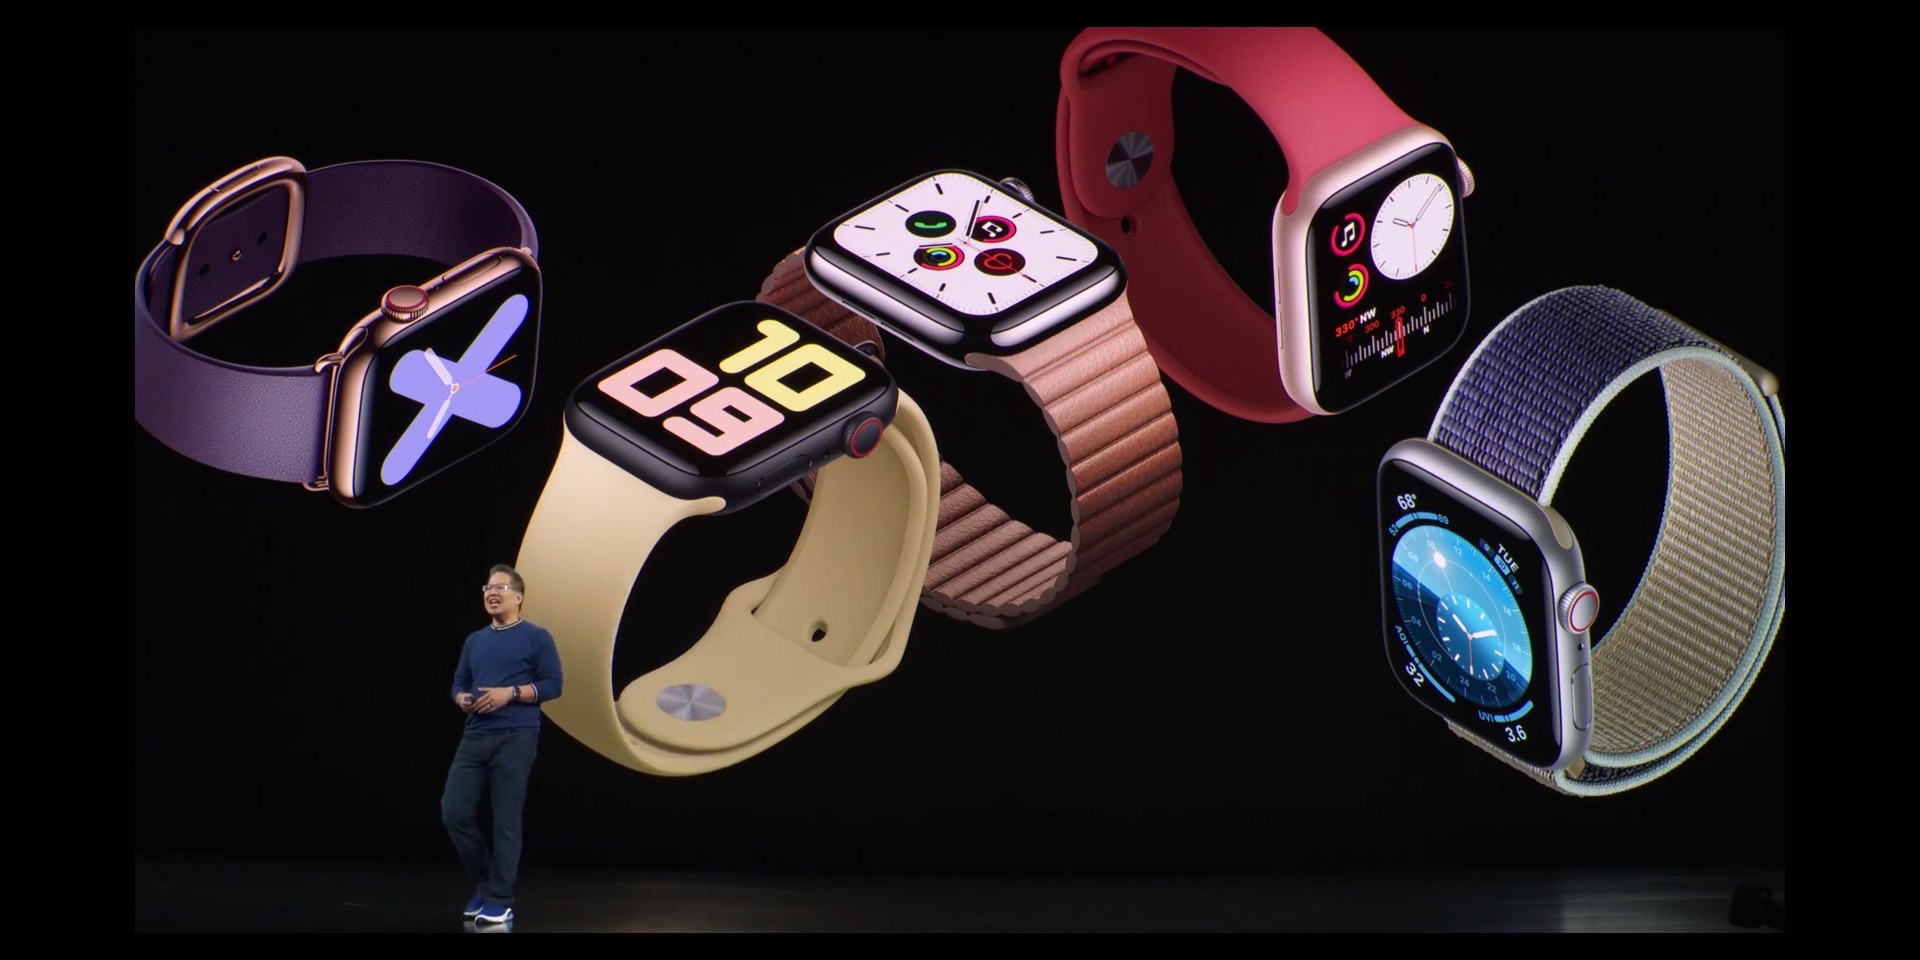 Apple unveils Apple Watch Series 5 with always-on display, compass,  titanium, and ceramic - 9to5Mac